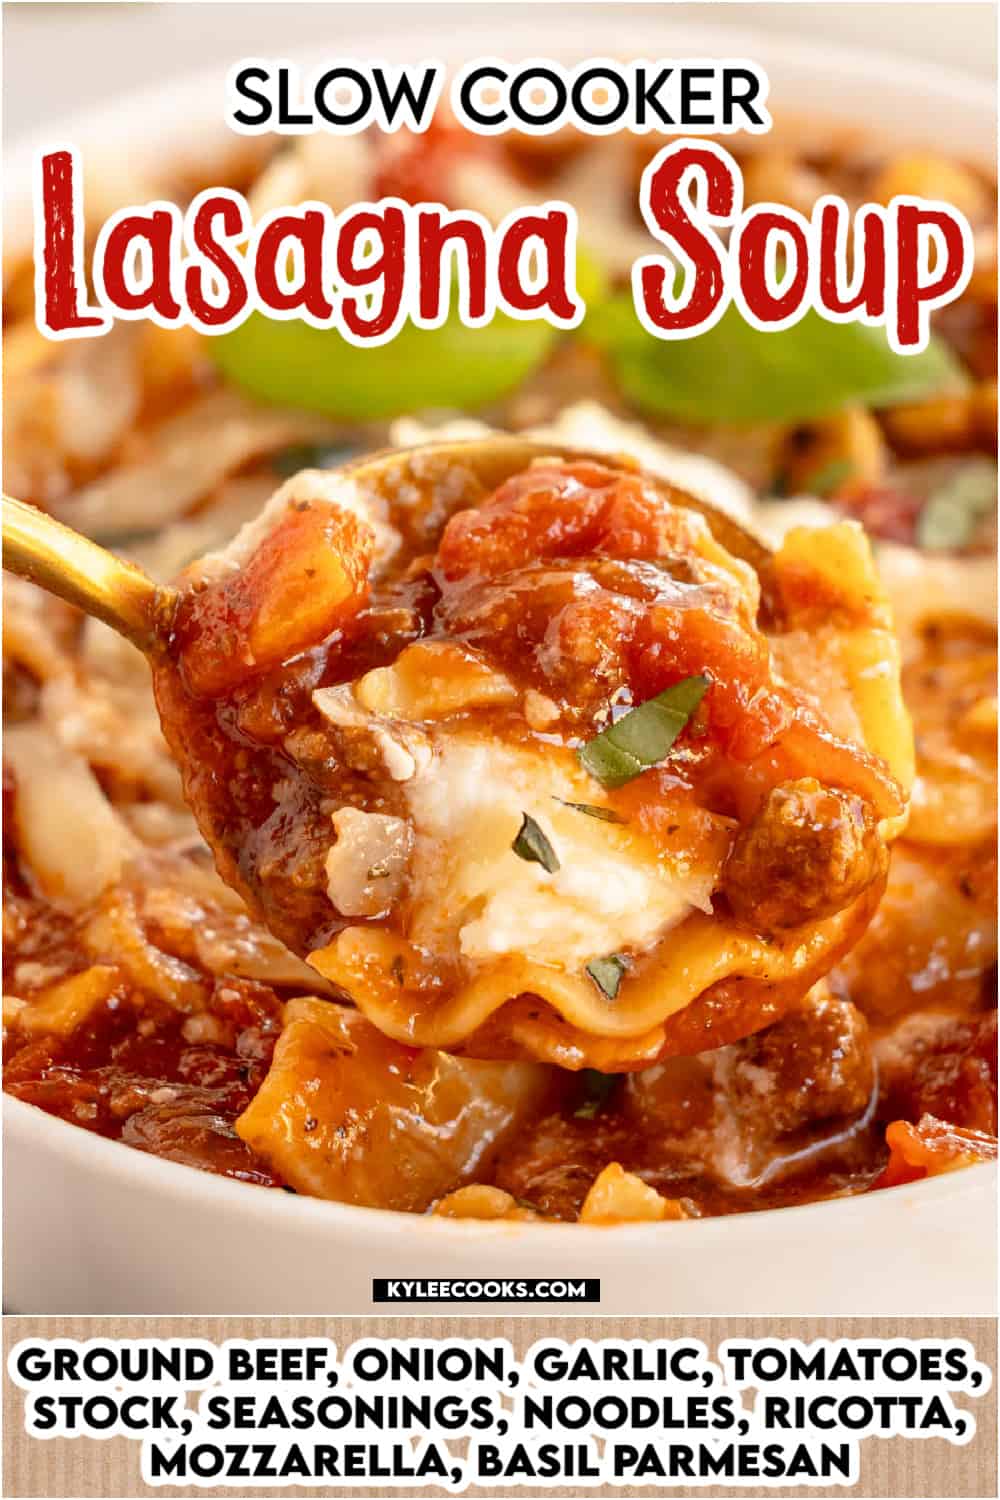 Slow cooker lasagna soup in a bowl with a spoon with recipe name and ingredients overlaid in text.